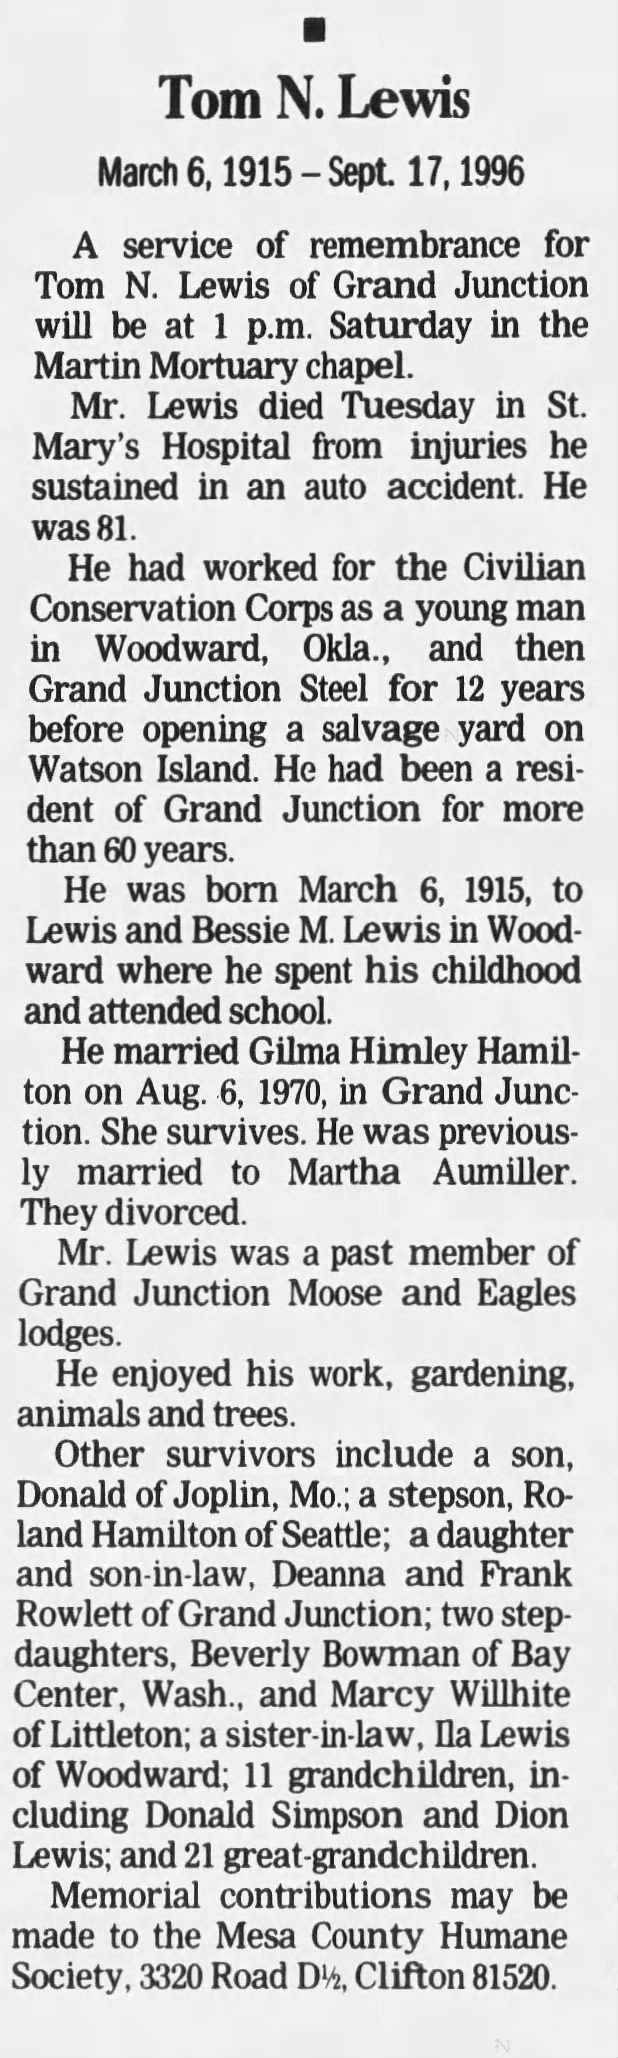 Obituary for Tom N. Lewis, 1915-1996 (Aged 81)